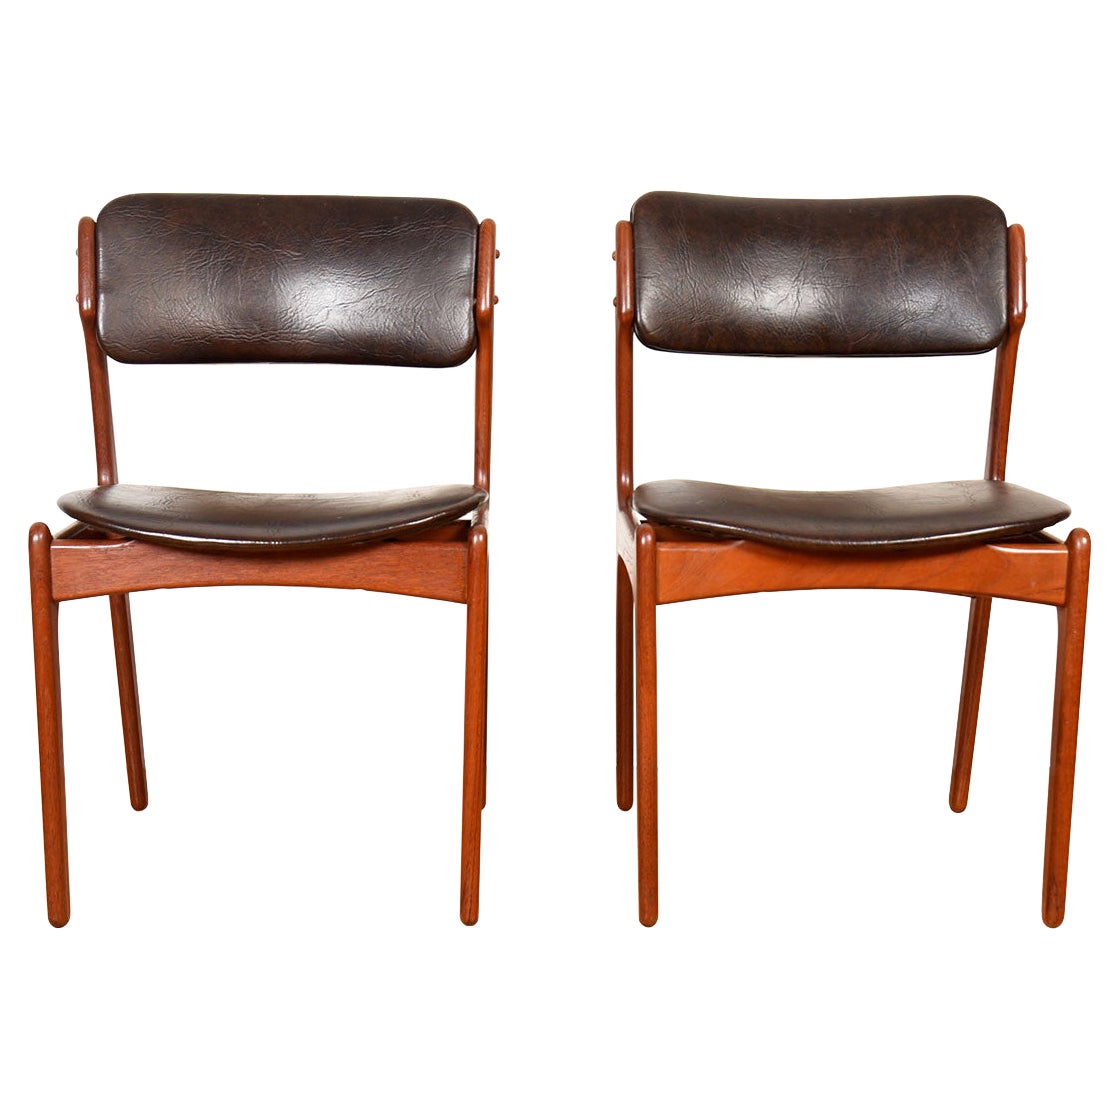 Pair of Danish Teak Dining Chairs in Chocolate Brown by Erik Buch For Sale